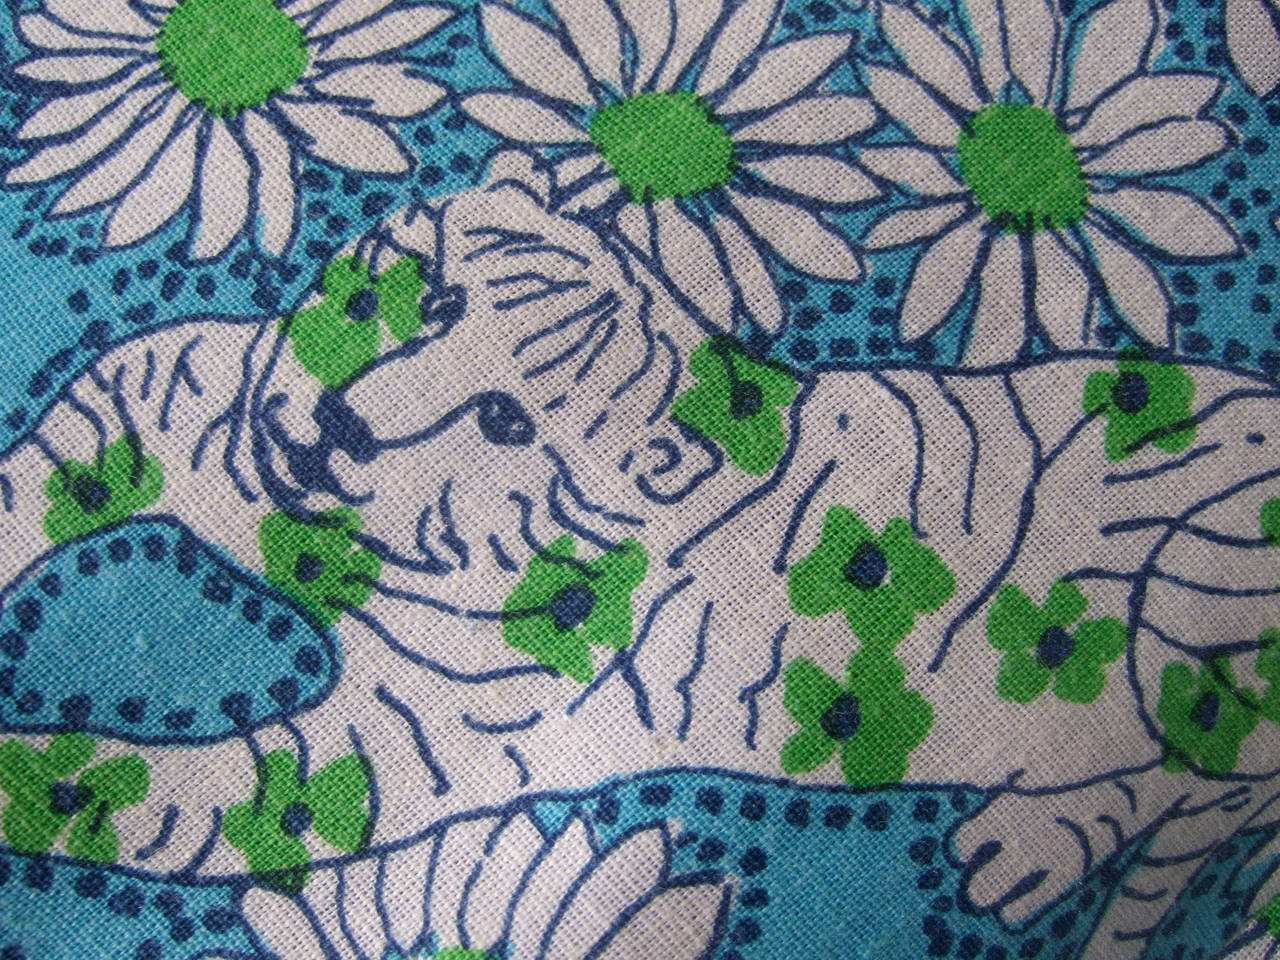 LILLY PULITZER Men's whimsical jungle print resort style jacket c 1970s
The unique summer jacket is designed with a bold print of exotic animals exploring thru a vibrant field of tropical flowers

The menagerie of animals includes lions, tigers,